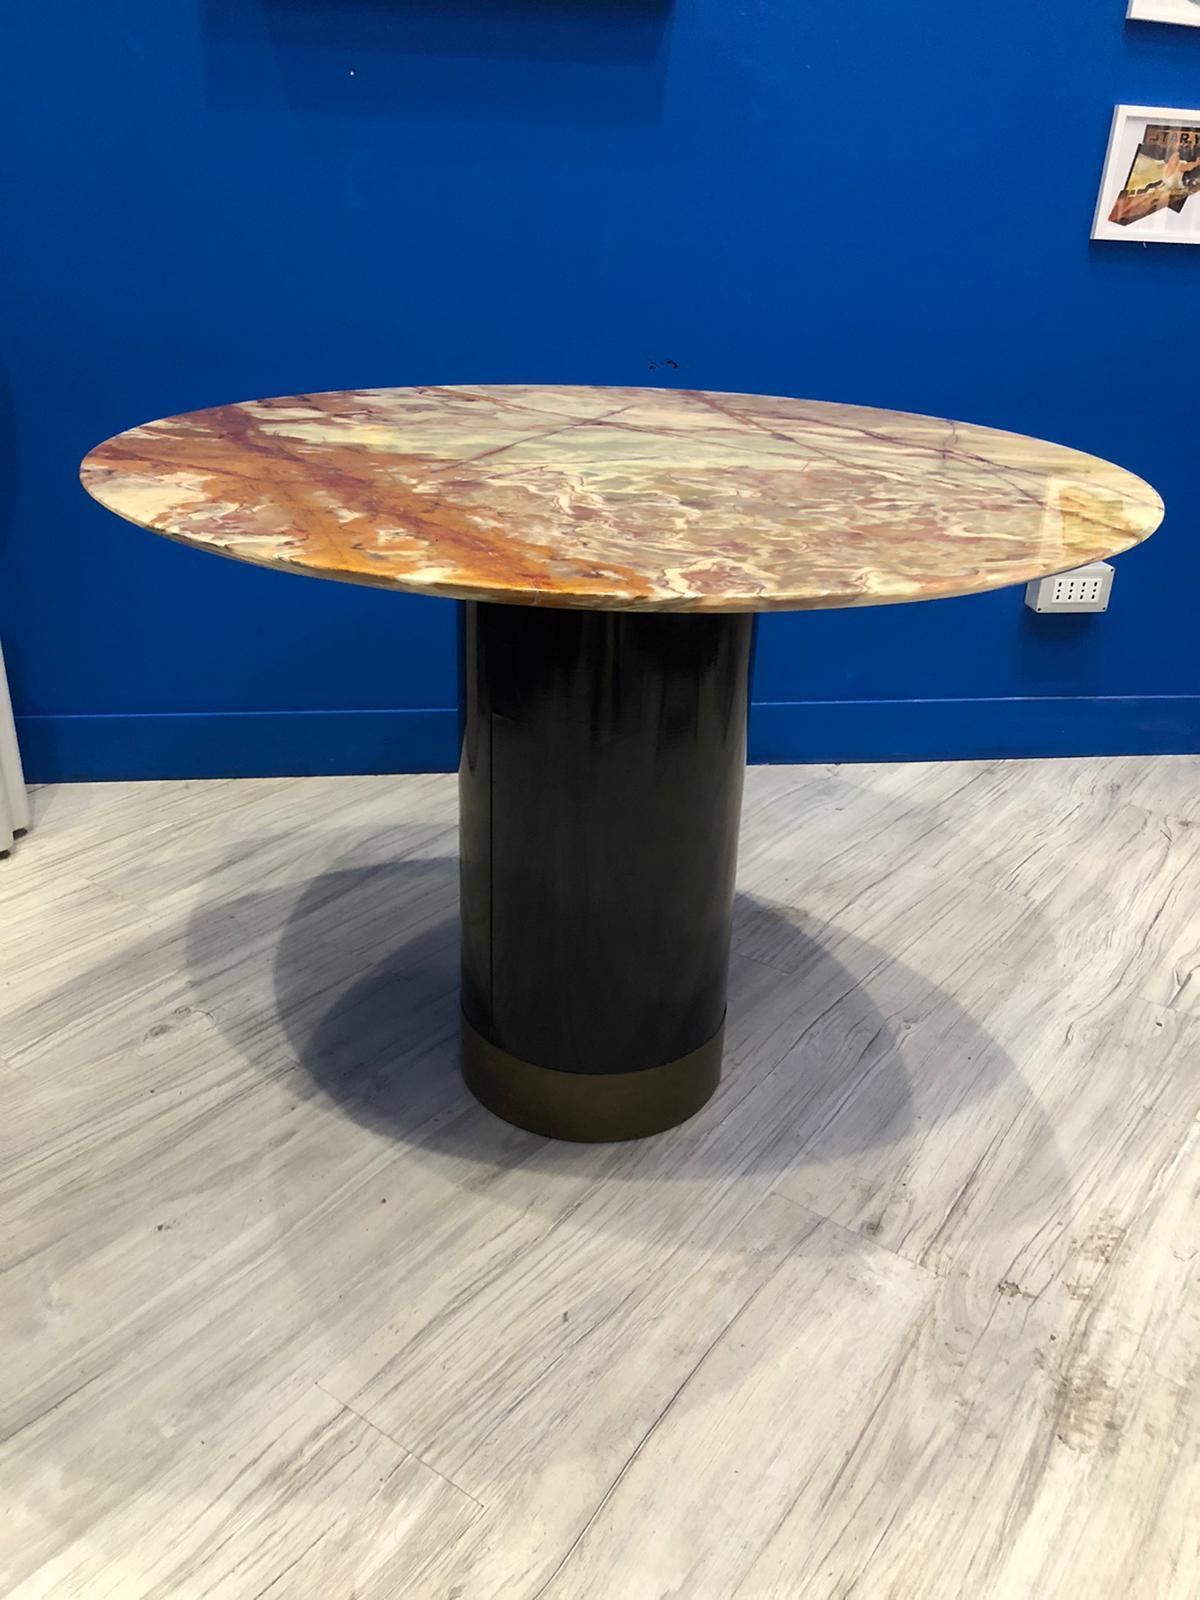 Italian Round Table 1950s Onyx Marble Top Wiith Black Wooden Base and Brass Band 1